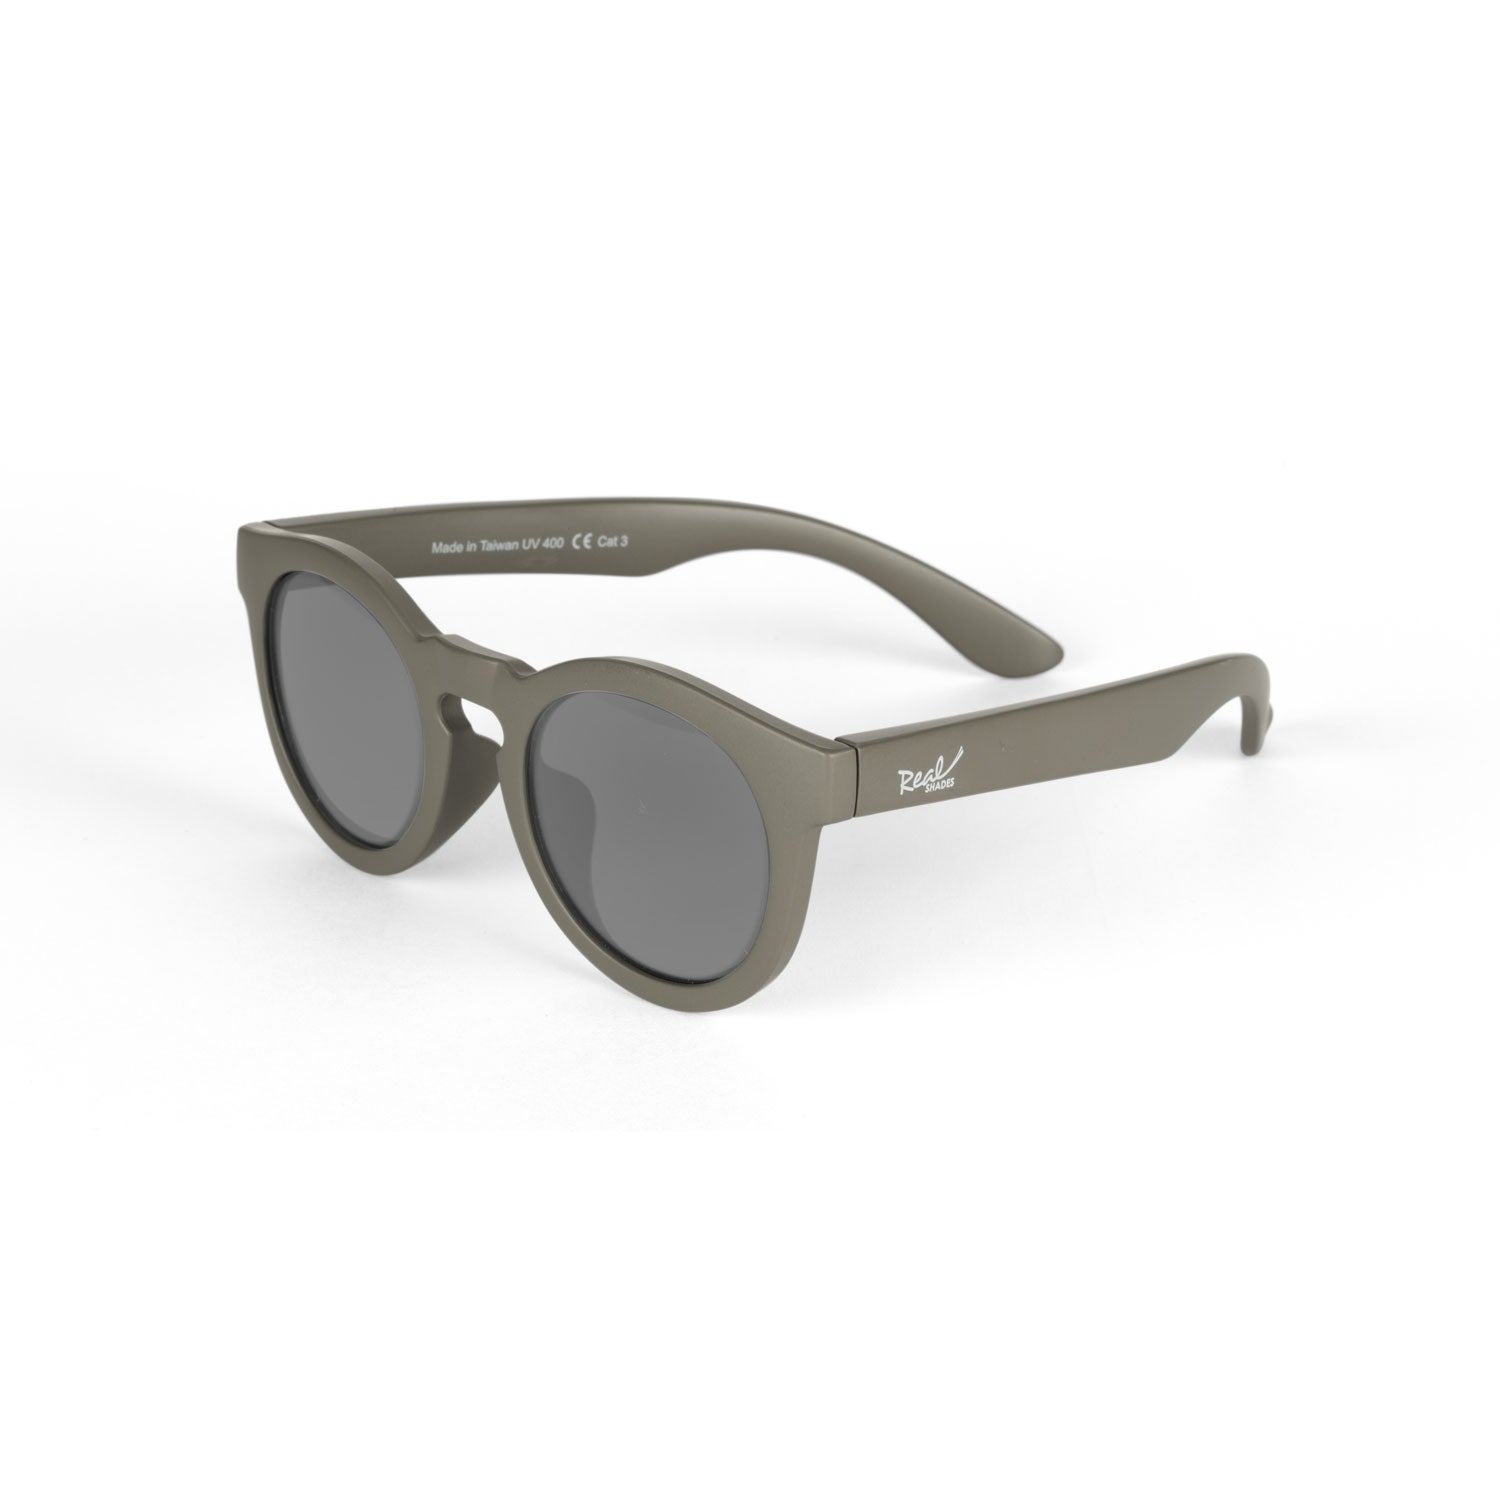 Military Olive Unbreakable Sunglasses - Real Shades